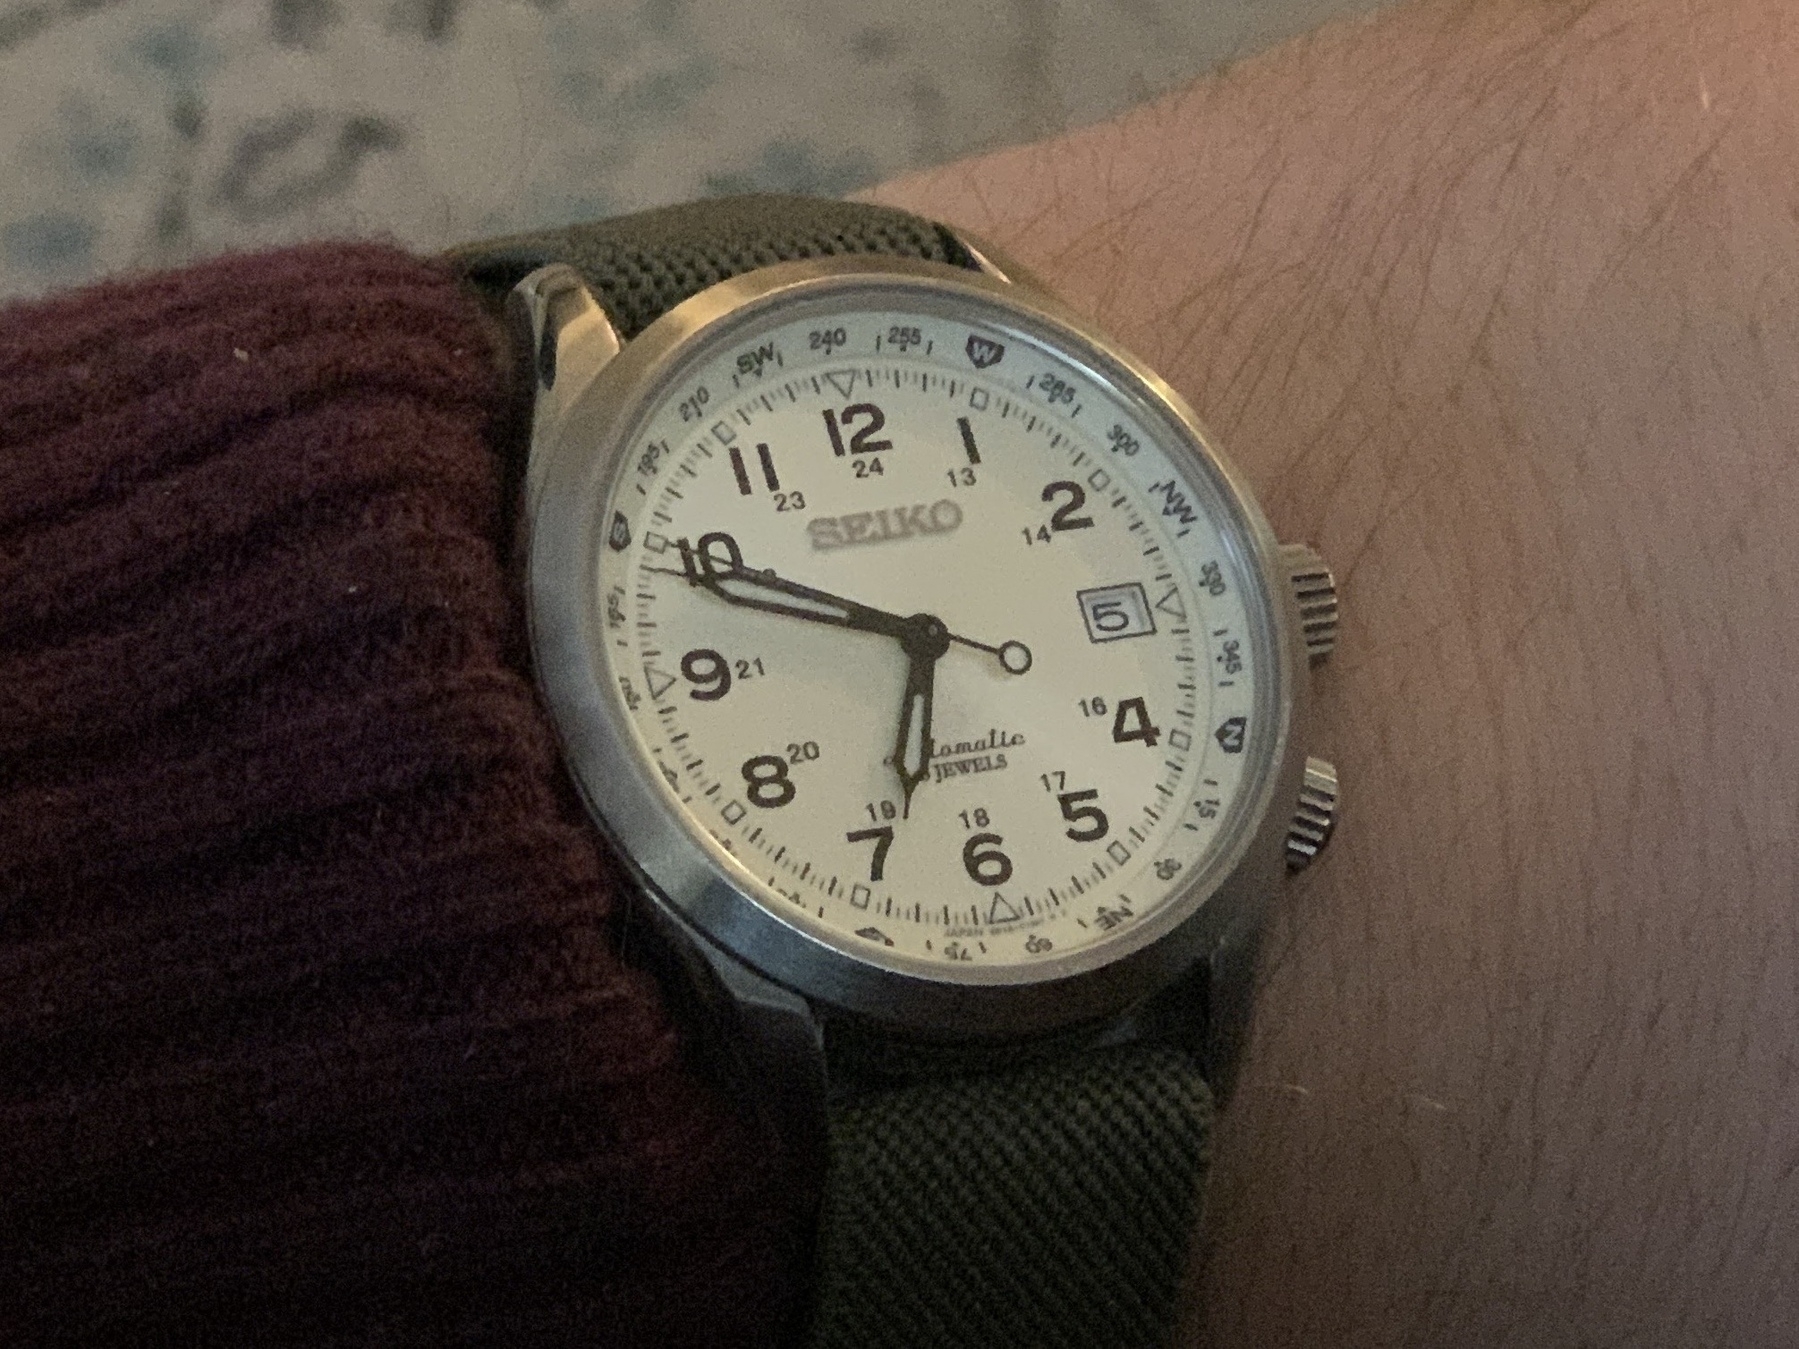 A wristwatch with a green strap, white dial, and black numerals is being worn on a person's wrist.